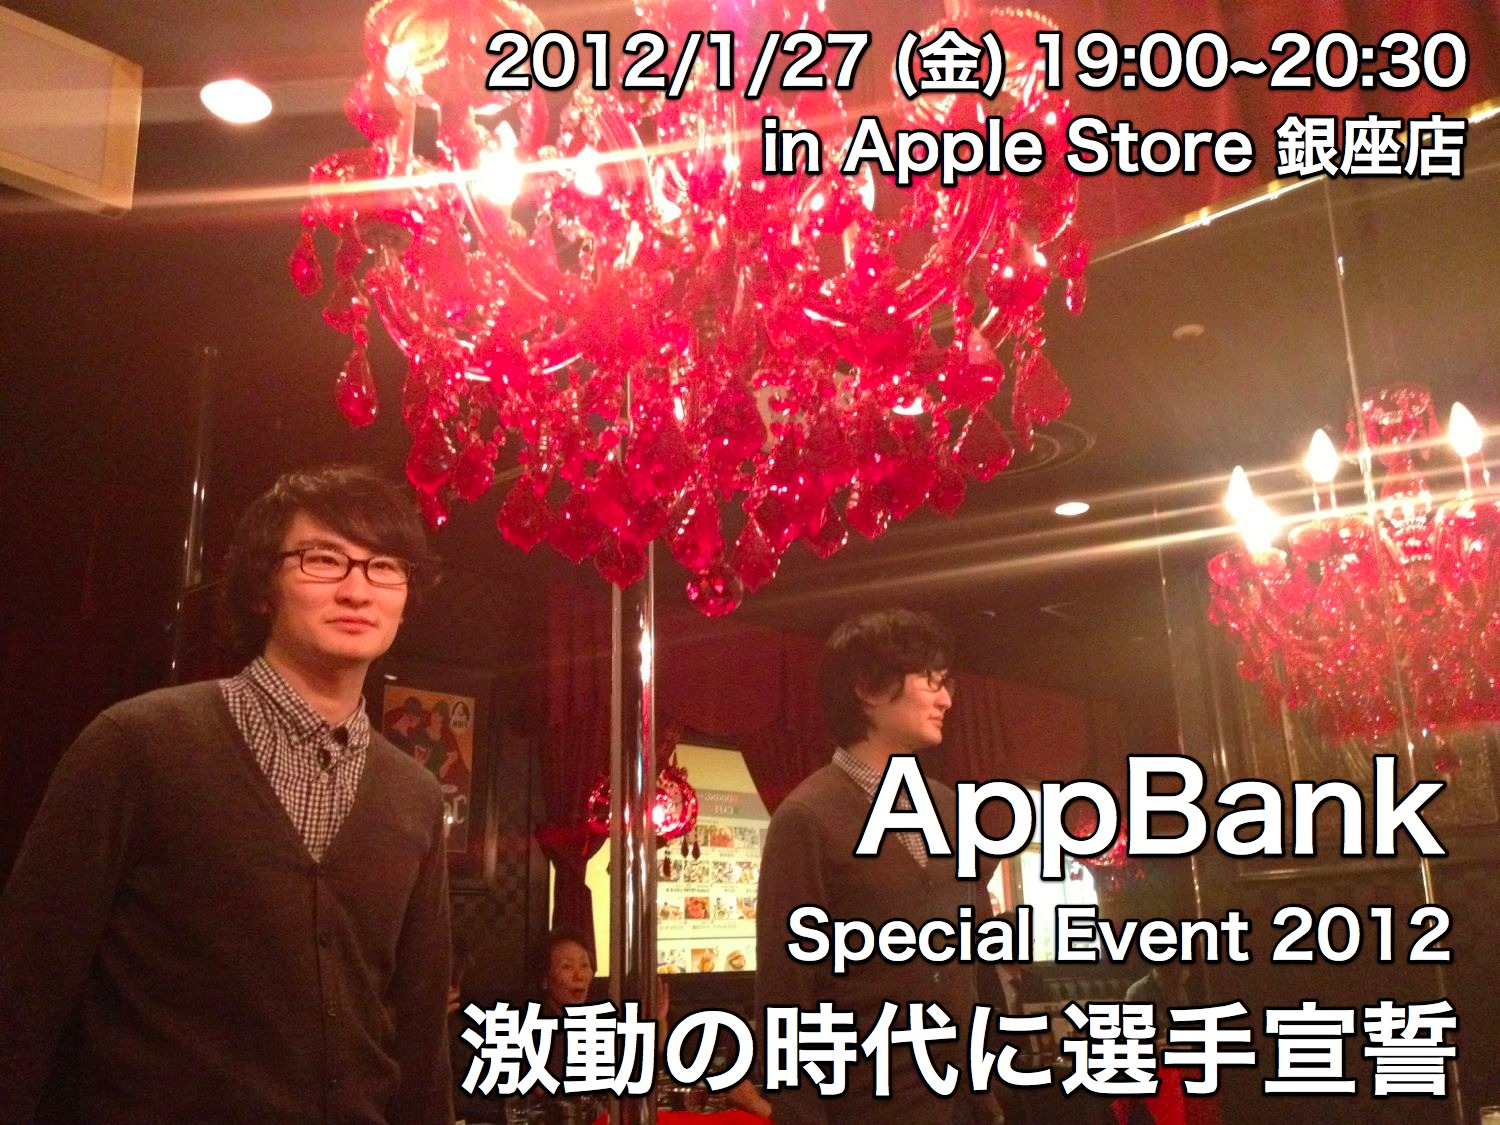 AppBank Special Event 2012